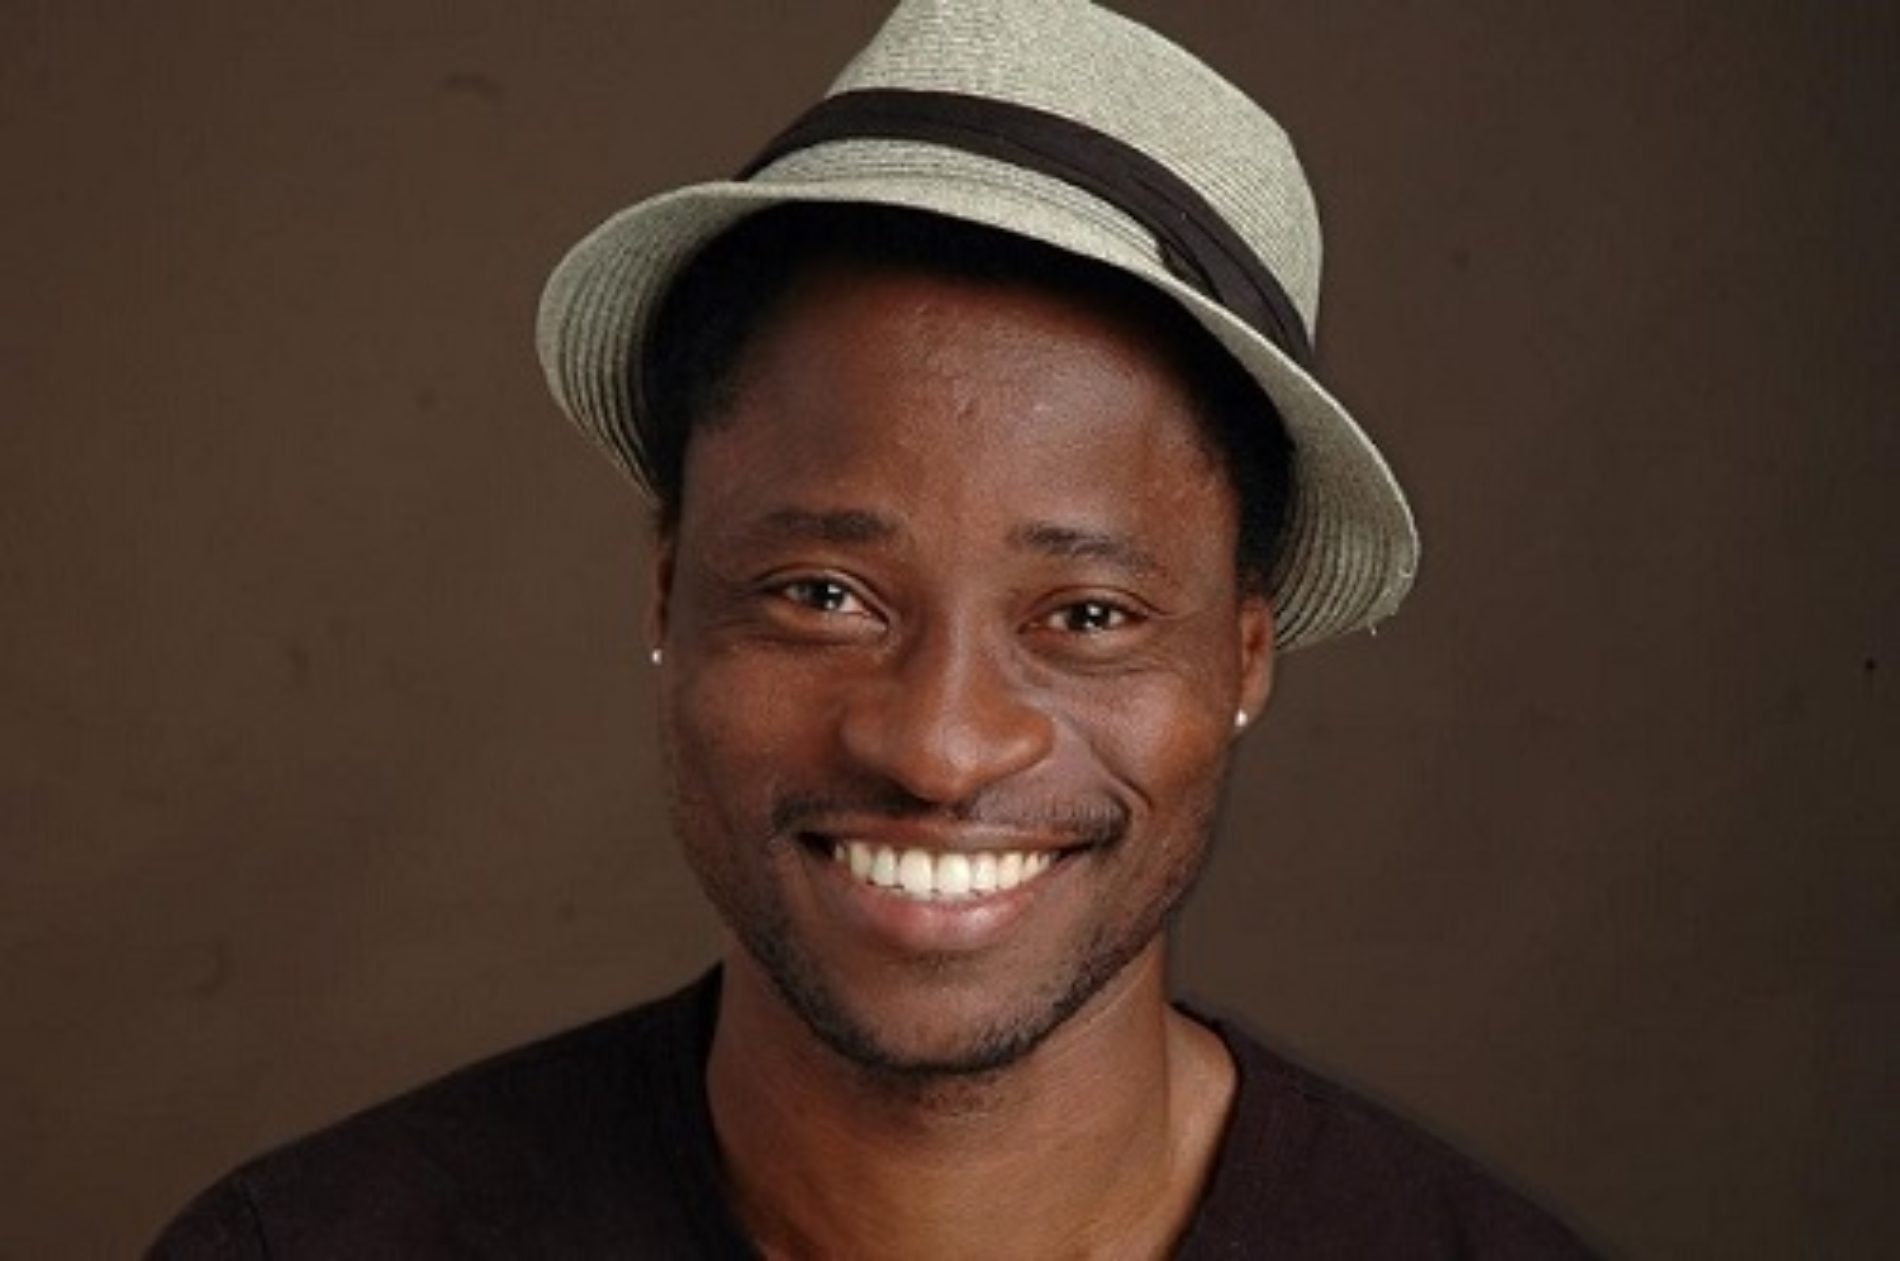 “If You Want Change, You Have To Challenge The Status Quo.” – Interview with Bisi Alimi